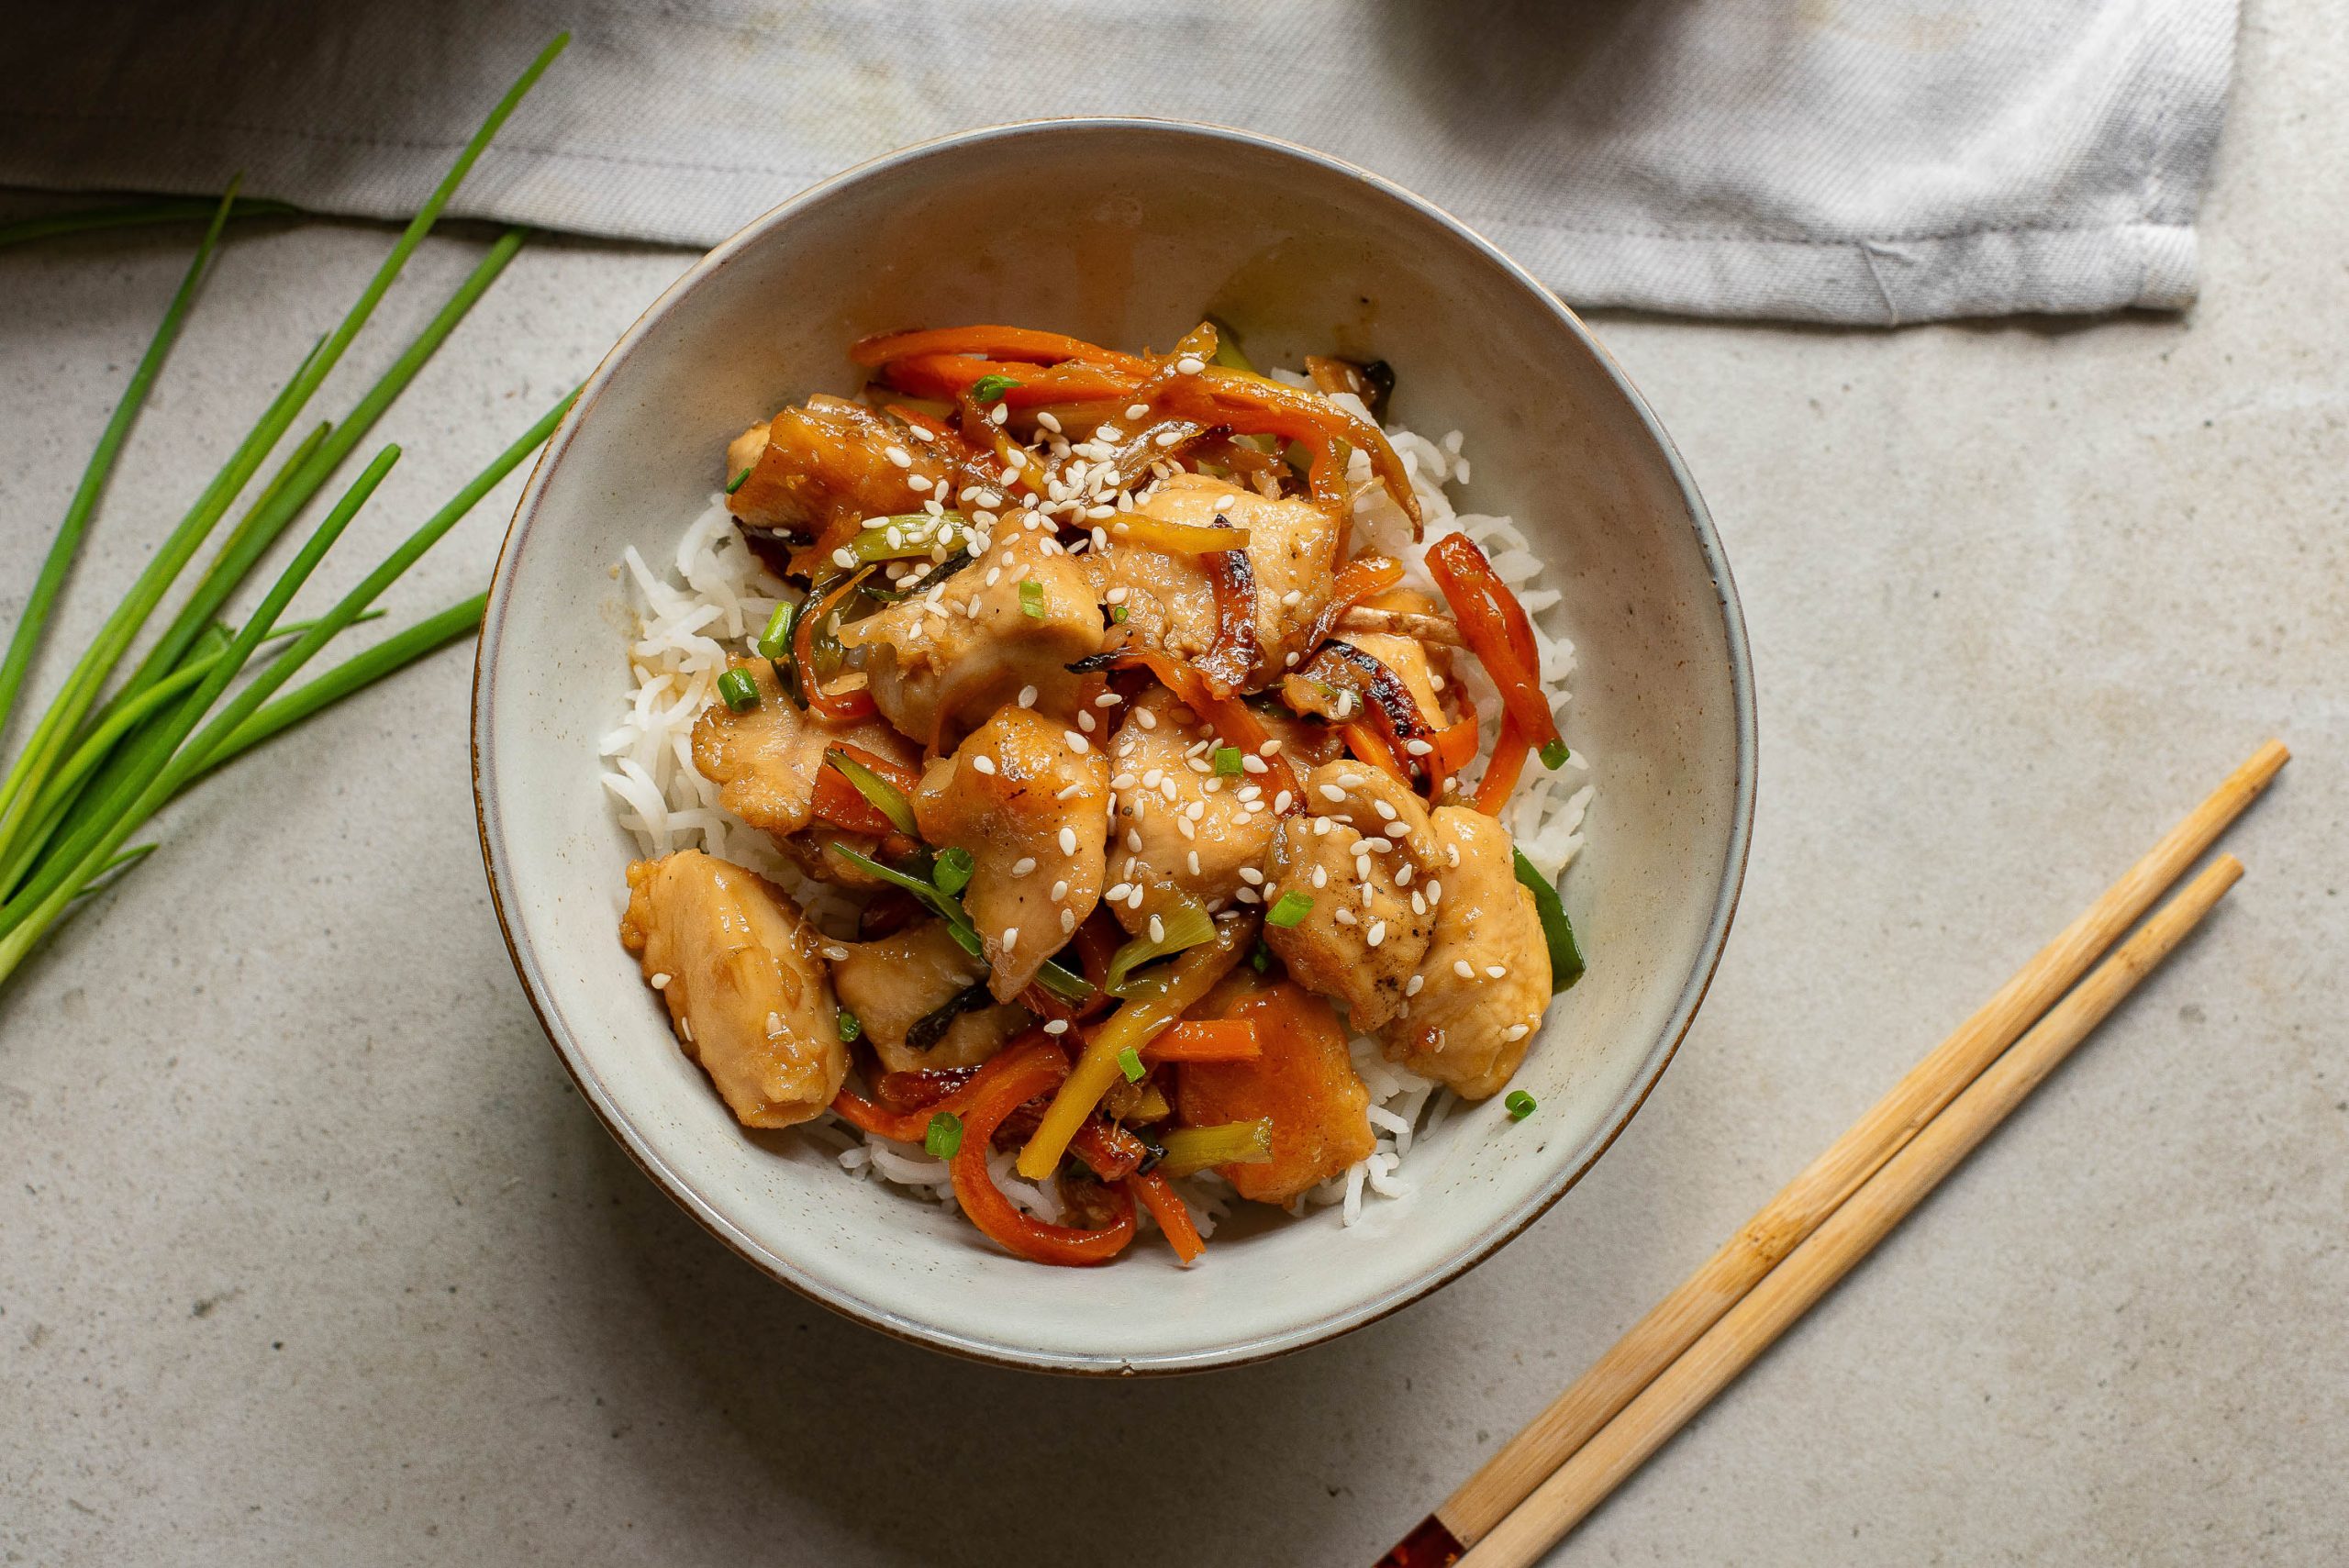 A bowl of stir fried chicken and vegetables with chopsticks.